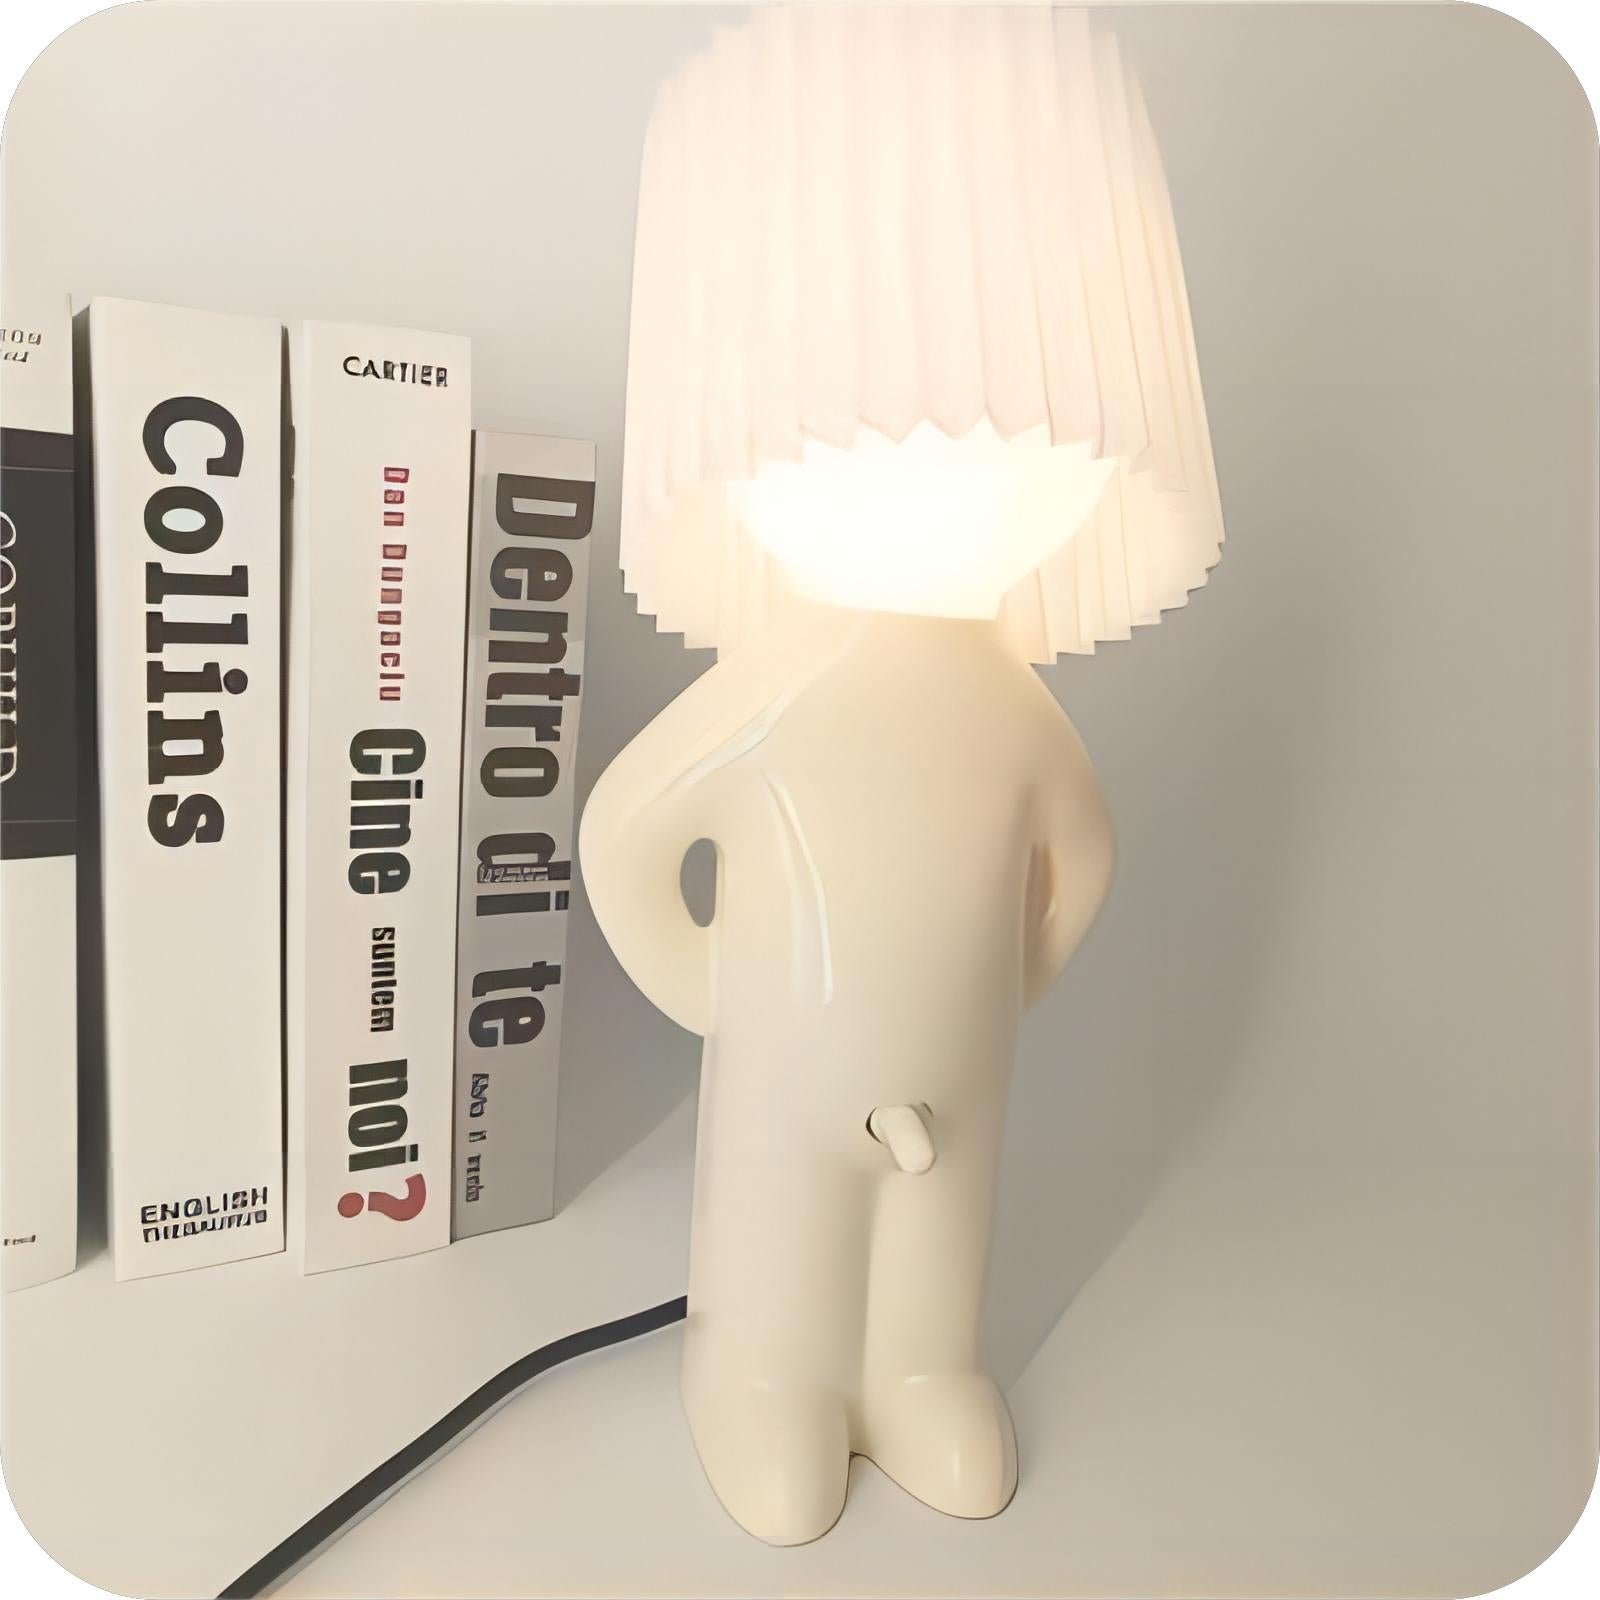 A Plea to Spare the Shy Boy Desk Lamp from Frequent Switching